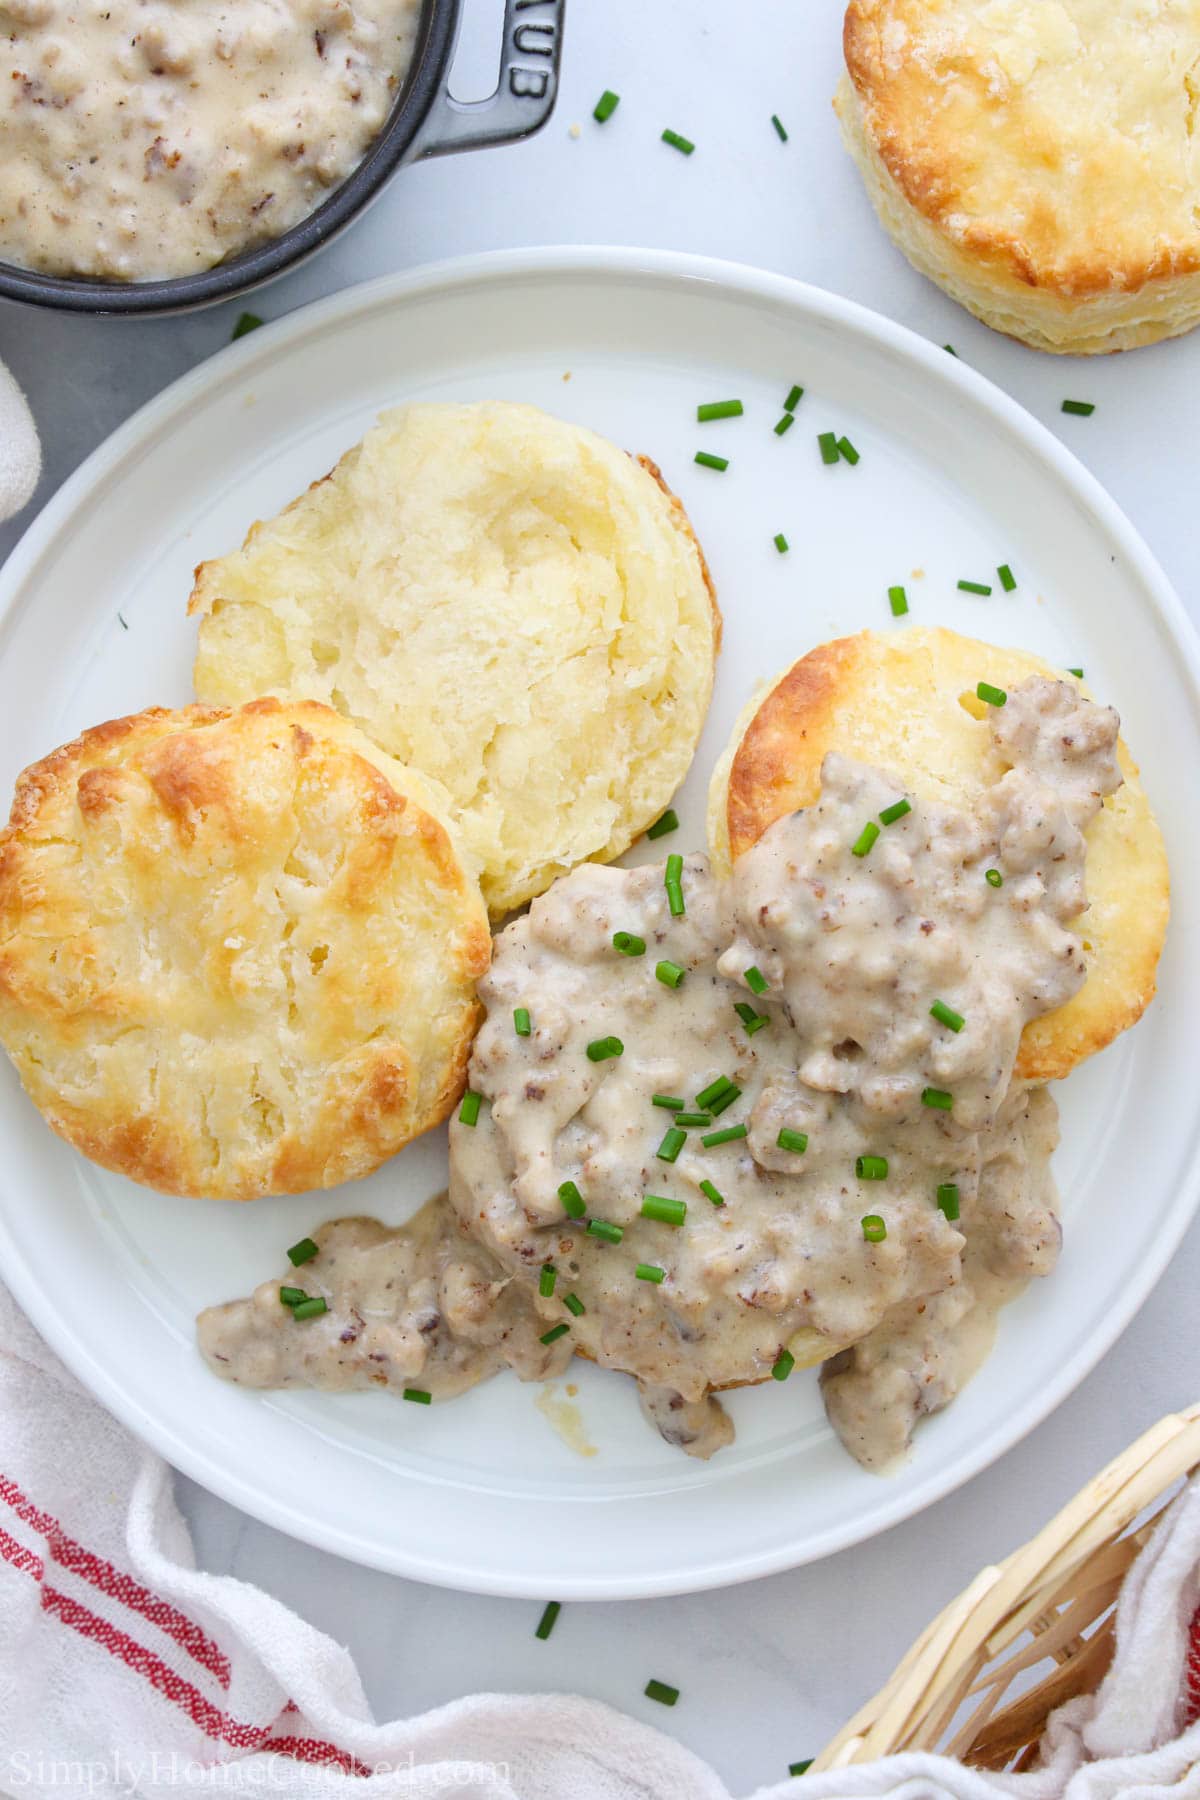 Plate of Biscuits and Sausage Gravy topped with chives